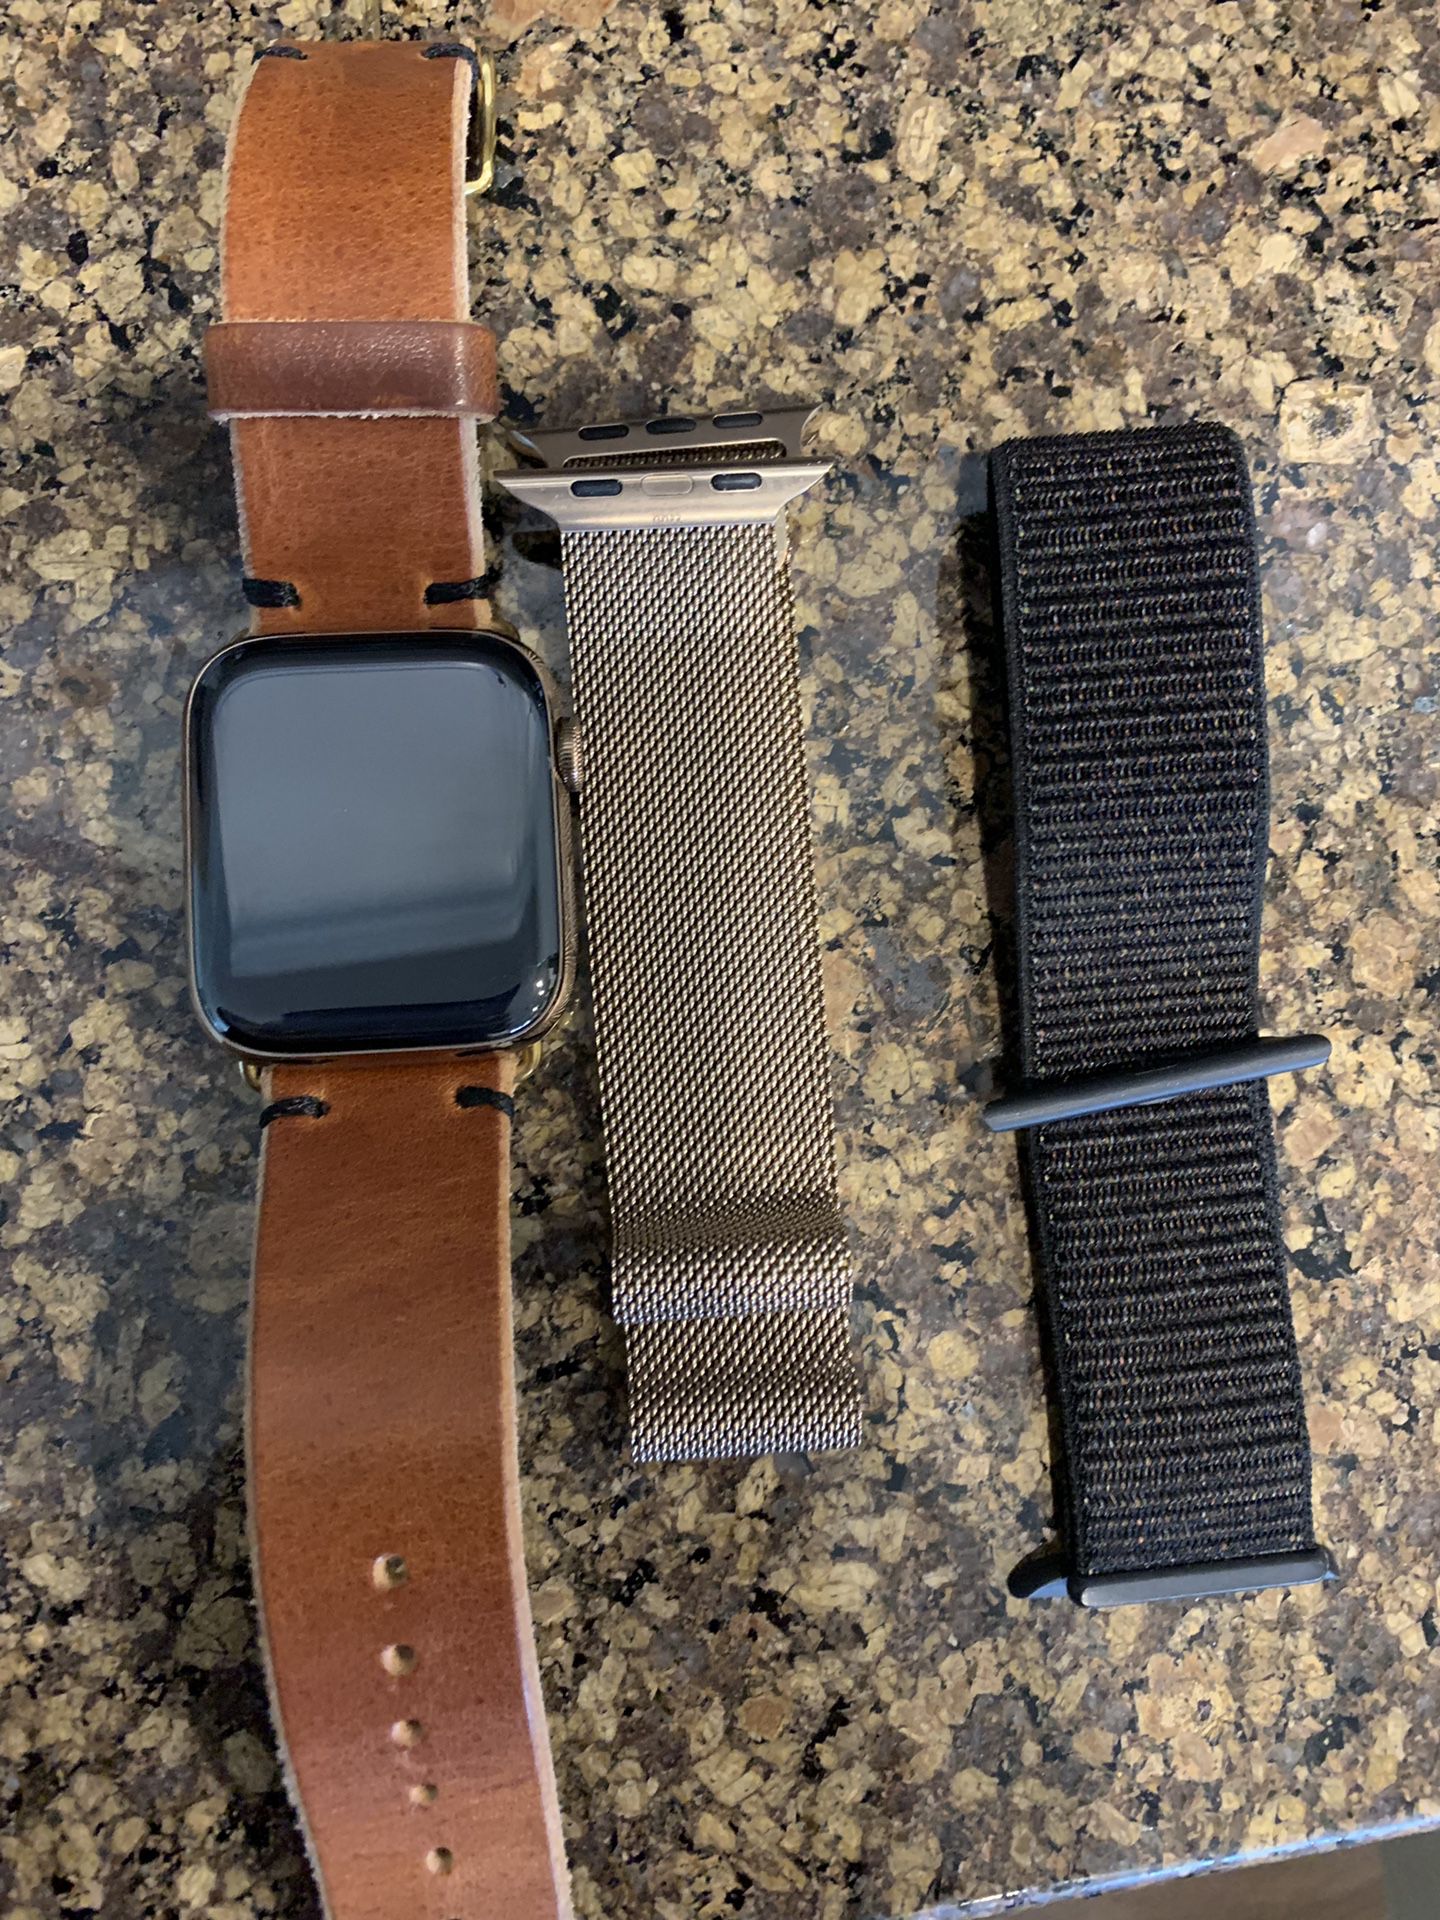 Apple Watch Series 4, 44mm Stainless Steel Gold Cellular